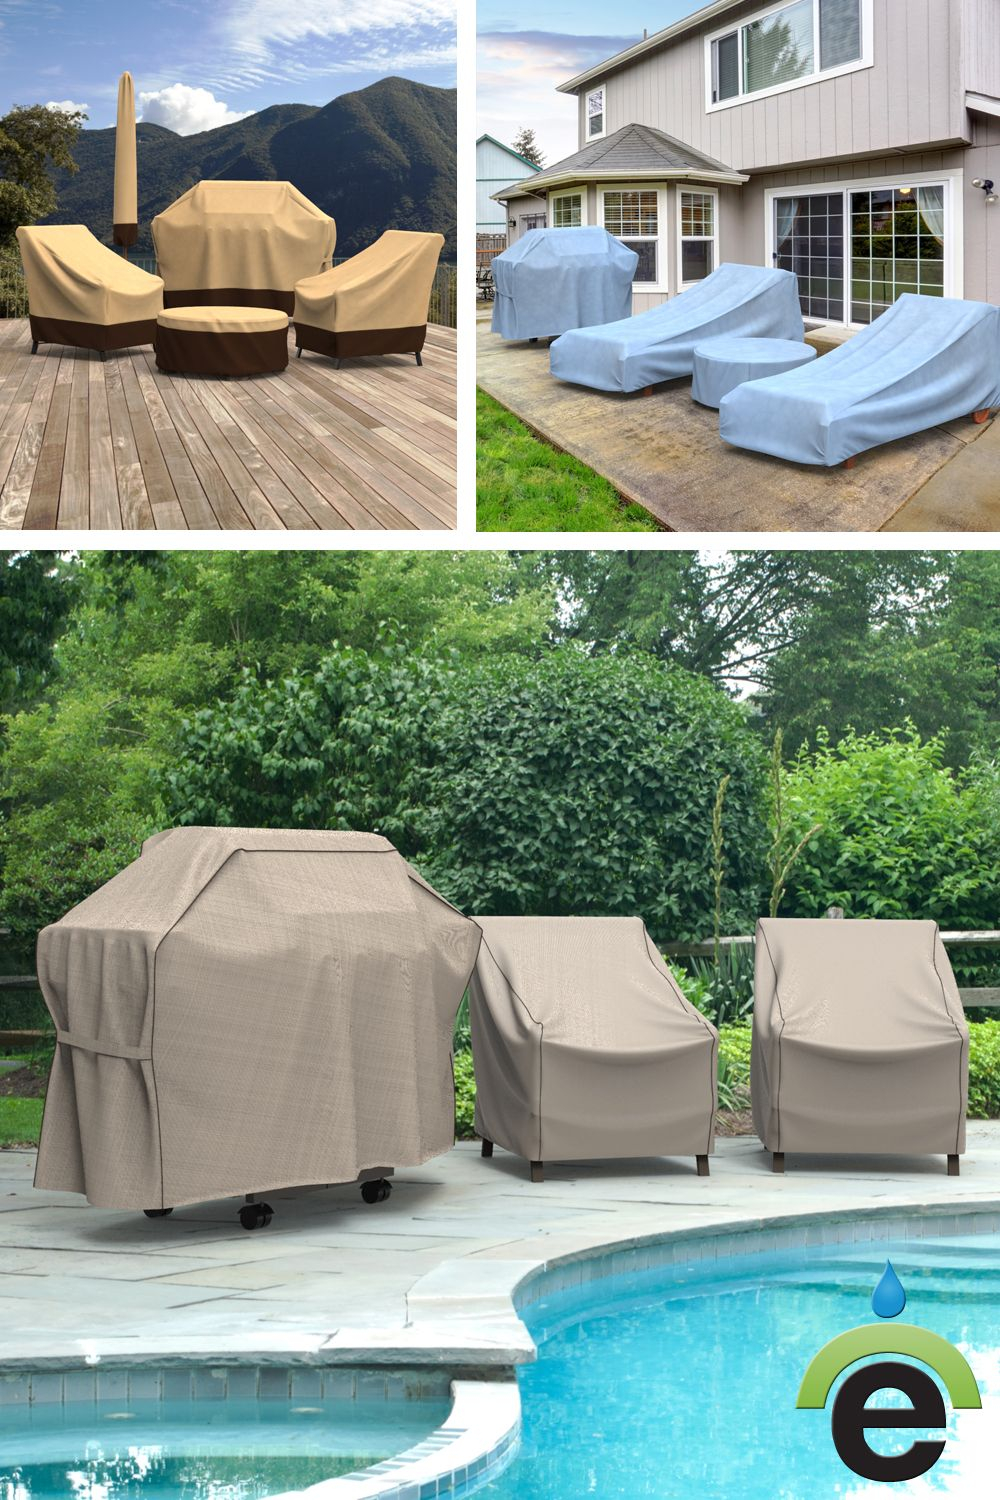 Patio Furniture Is An Essential Part Of Any Outdoor Living intended for size 1000 X 1500